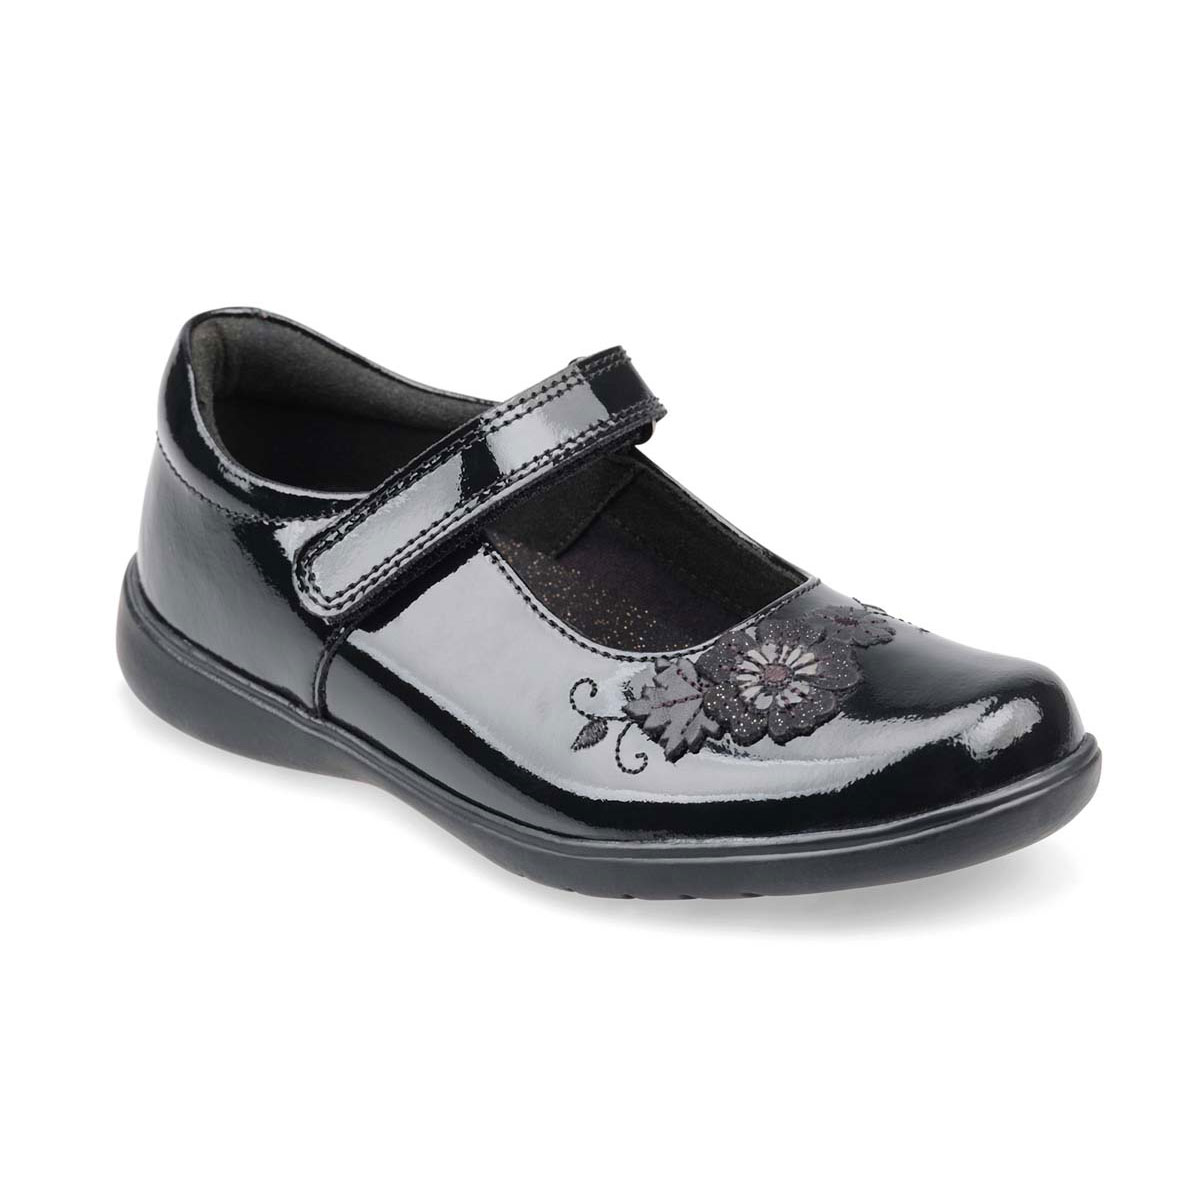 Start Rite - F Wish Mary Jane In Black Patent 2800-3 In Size 9 In Plain Black Patent For School Girls Shoes  In Black Patent For kids